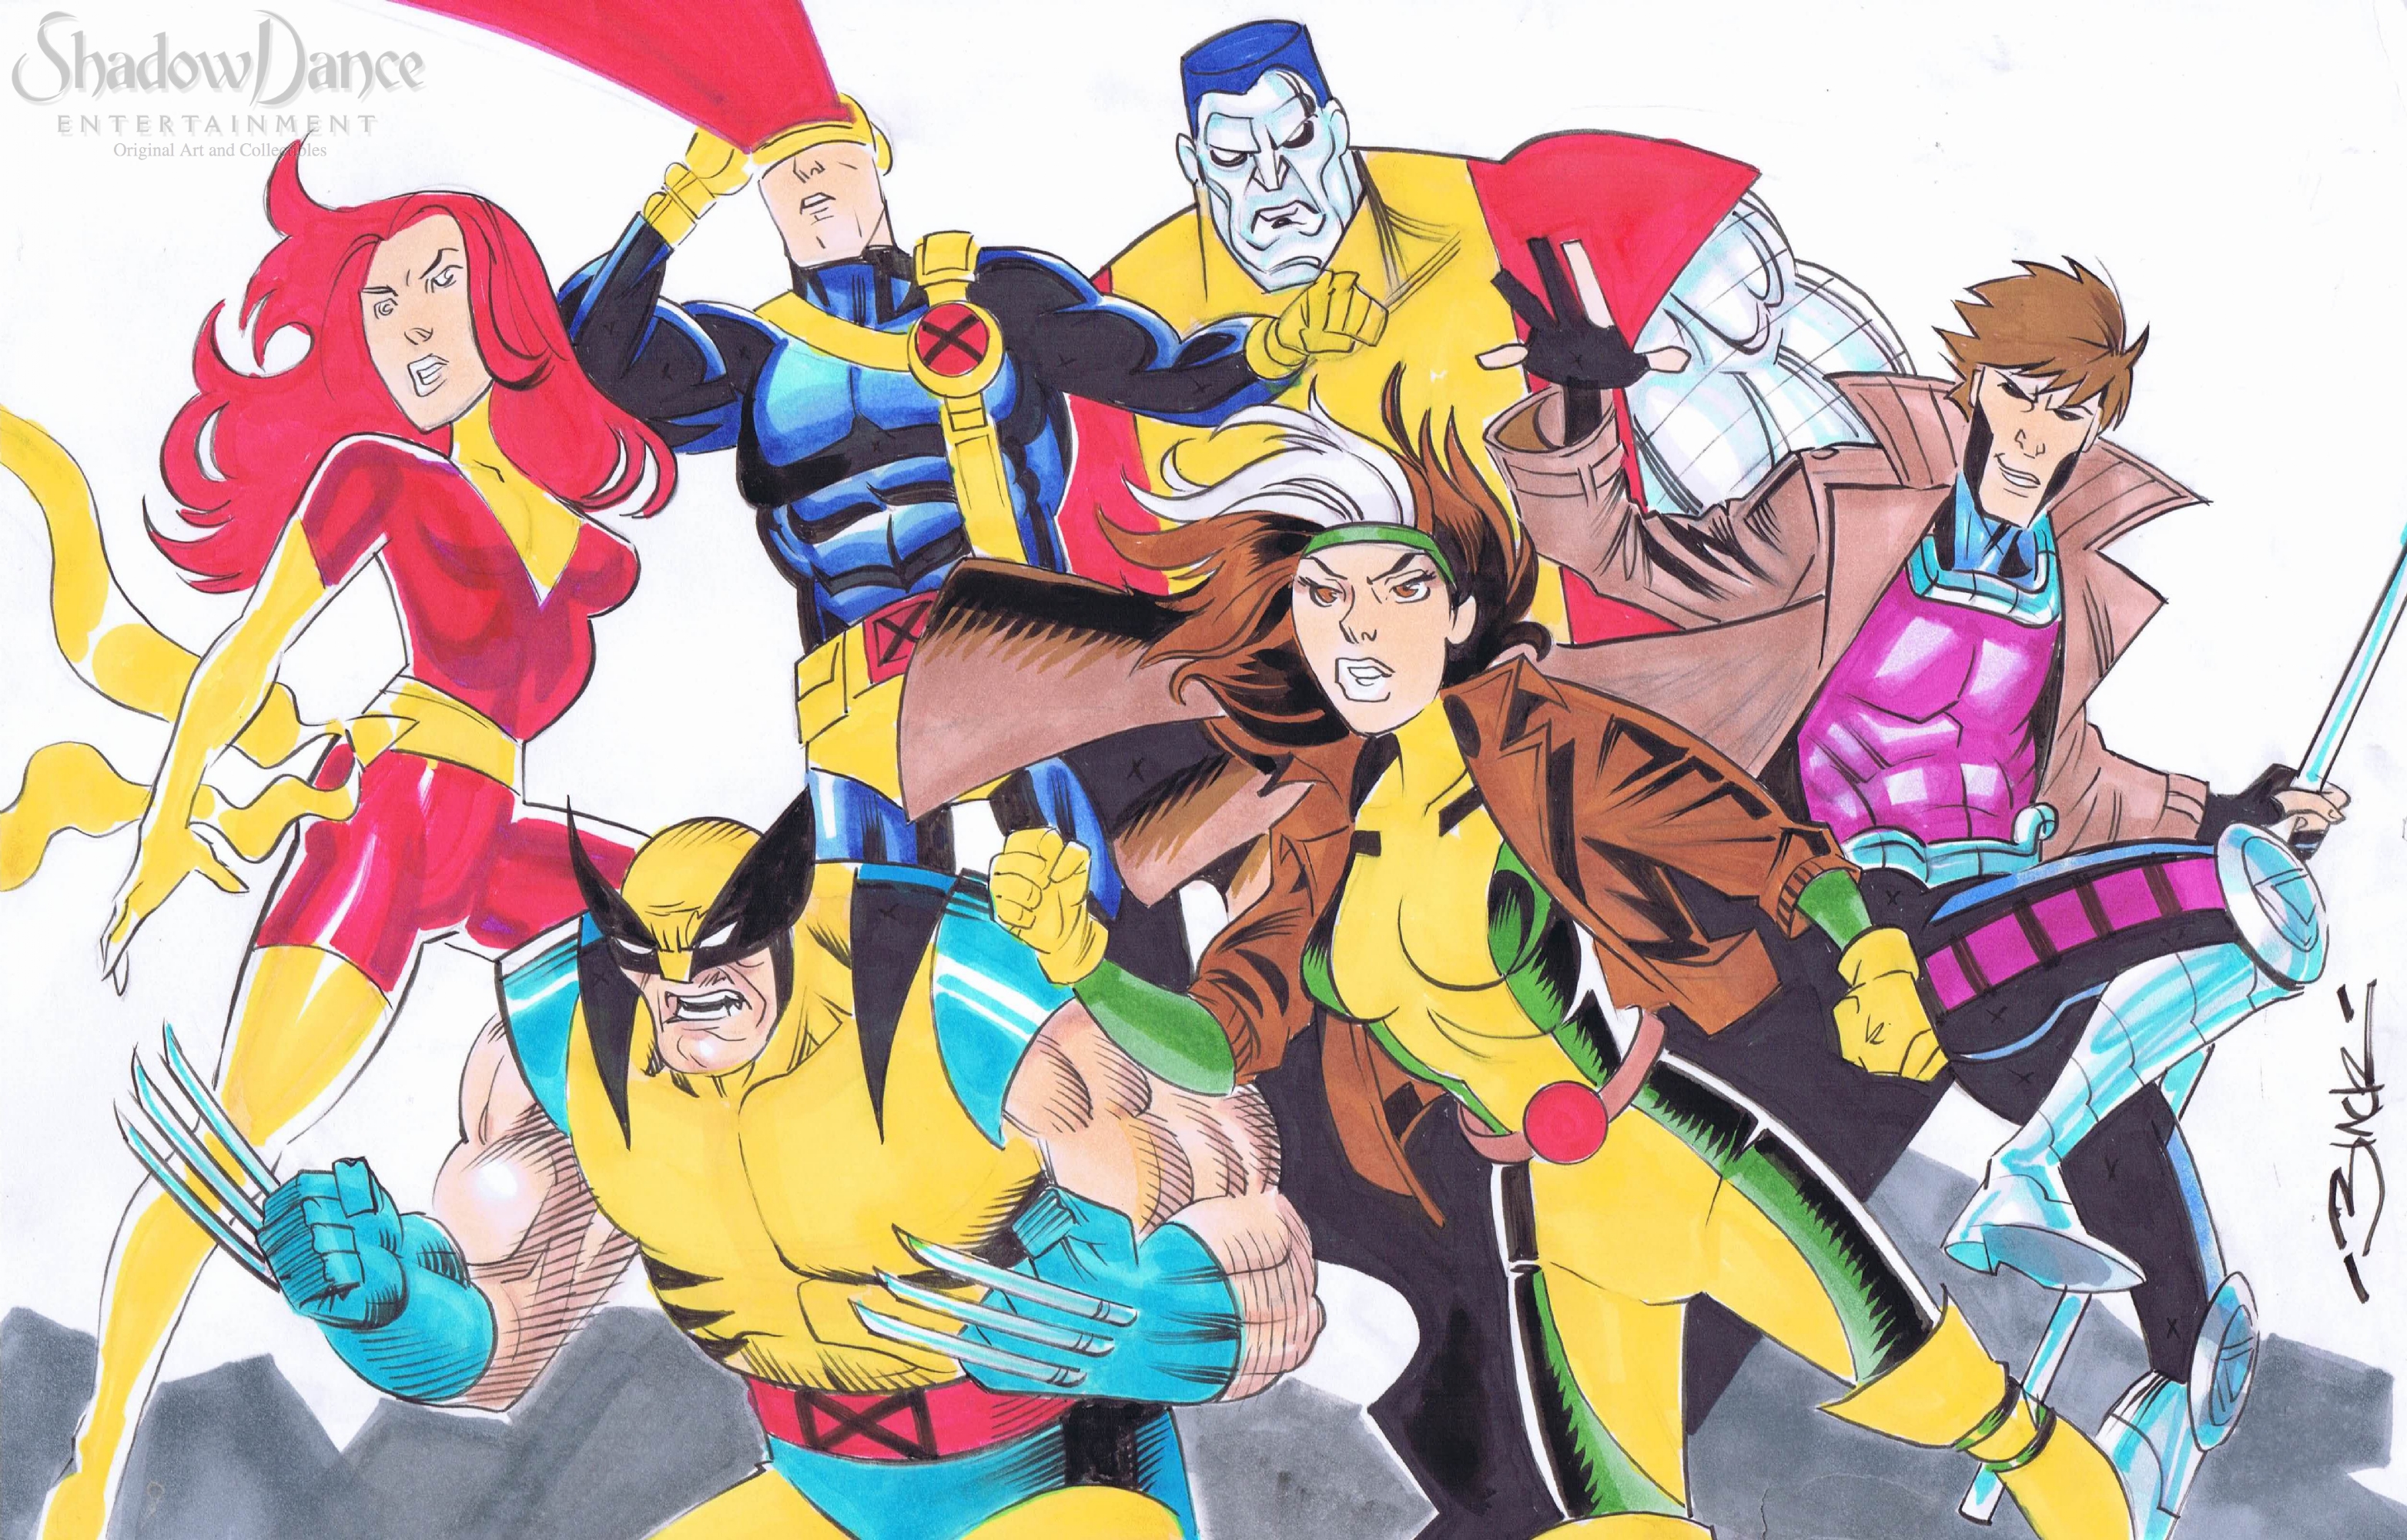 X-men commission by Dana Black (2022), in Dave Kopecki's X-MEN CHARACTERS -  commissions, sketches & sketch cards Comic Art Gallery Room